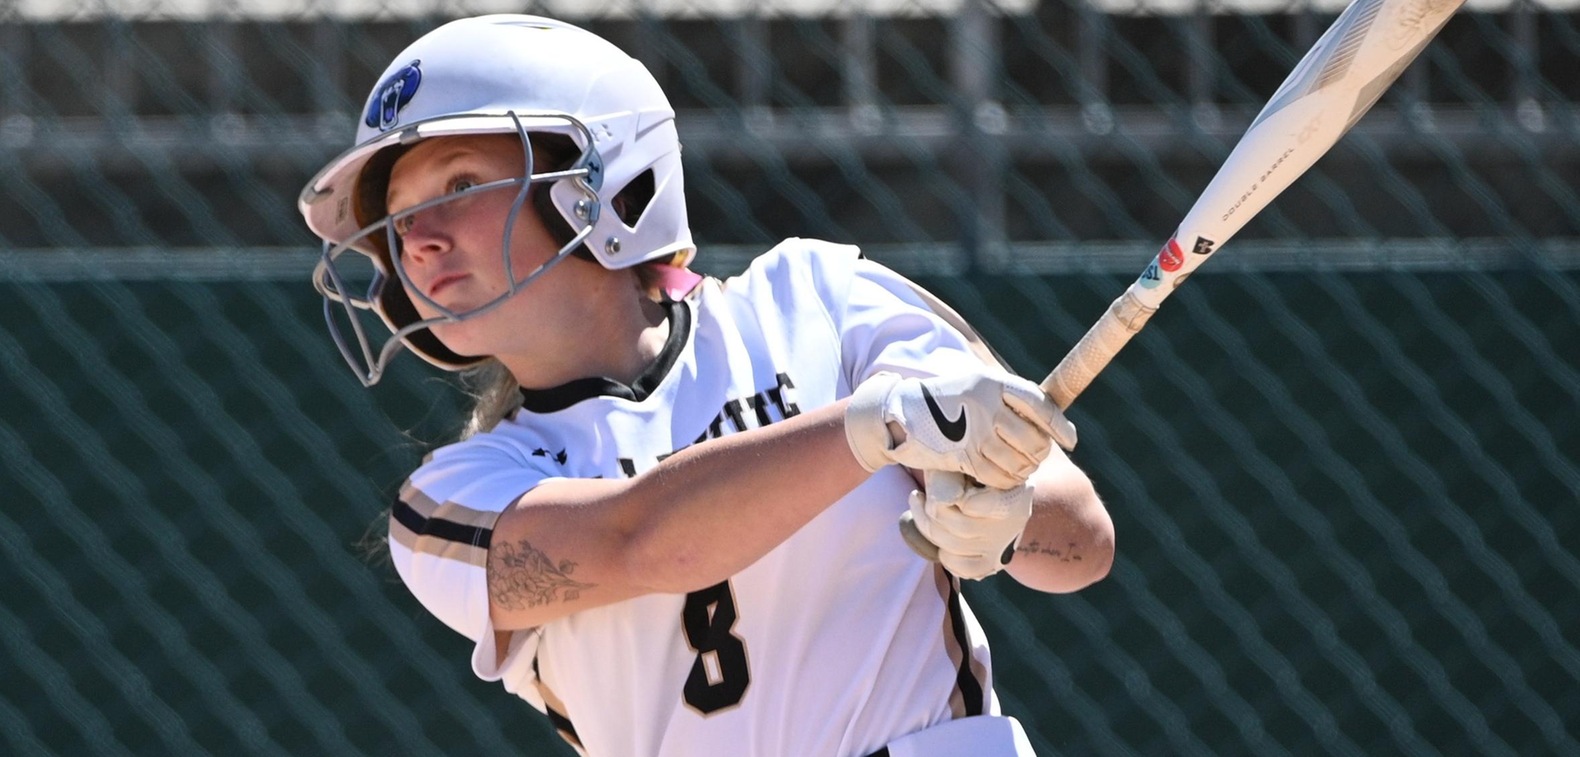 Sami Reding led the BU offense, going 2-for-3 with a double and an RBI.